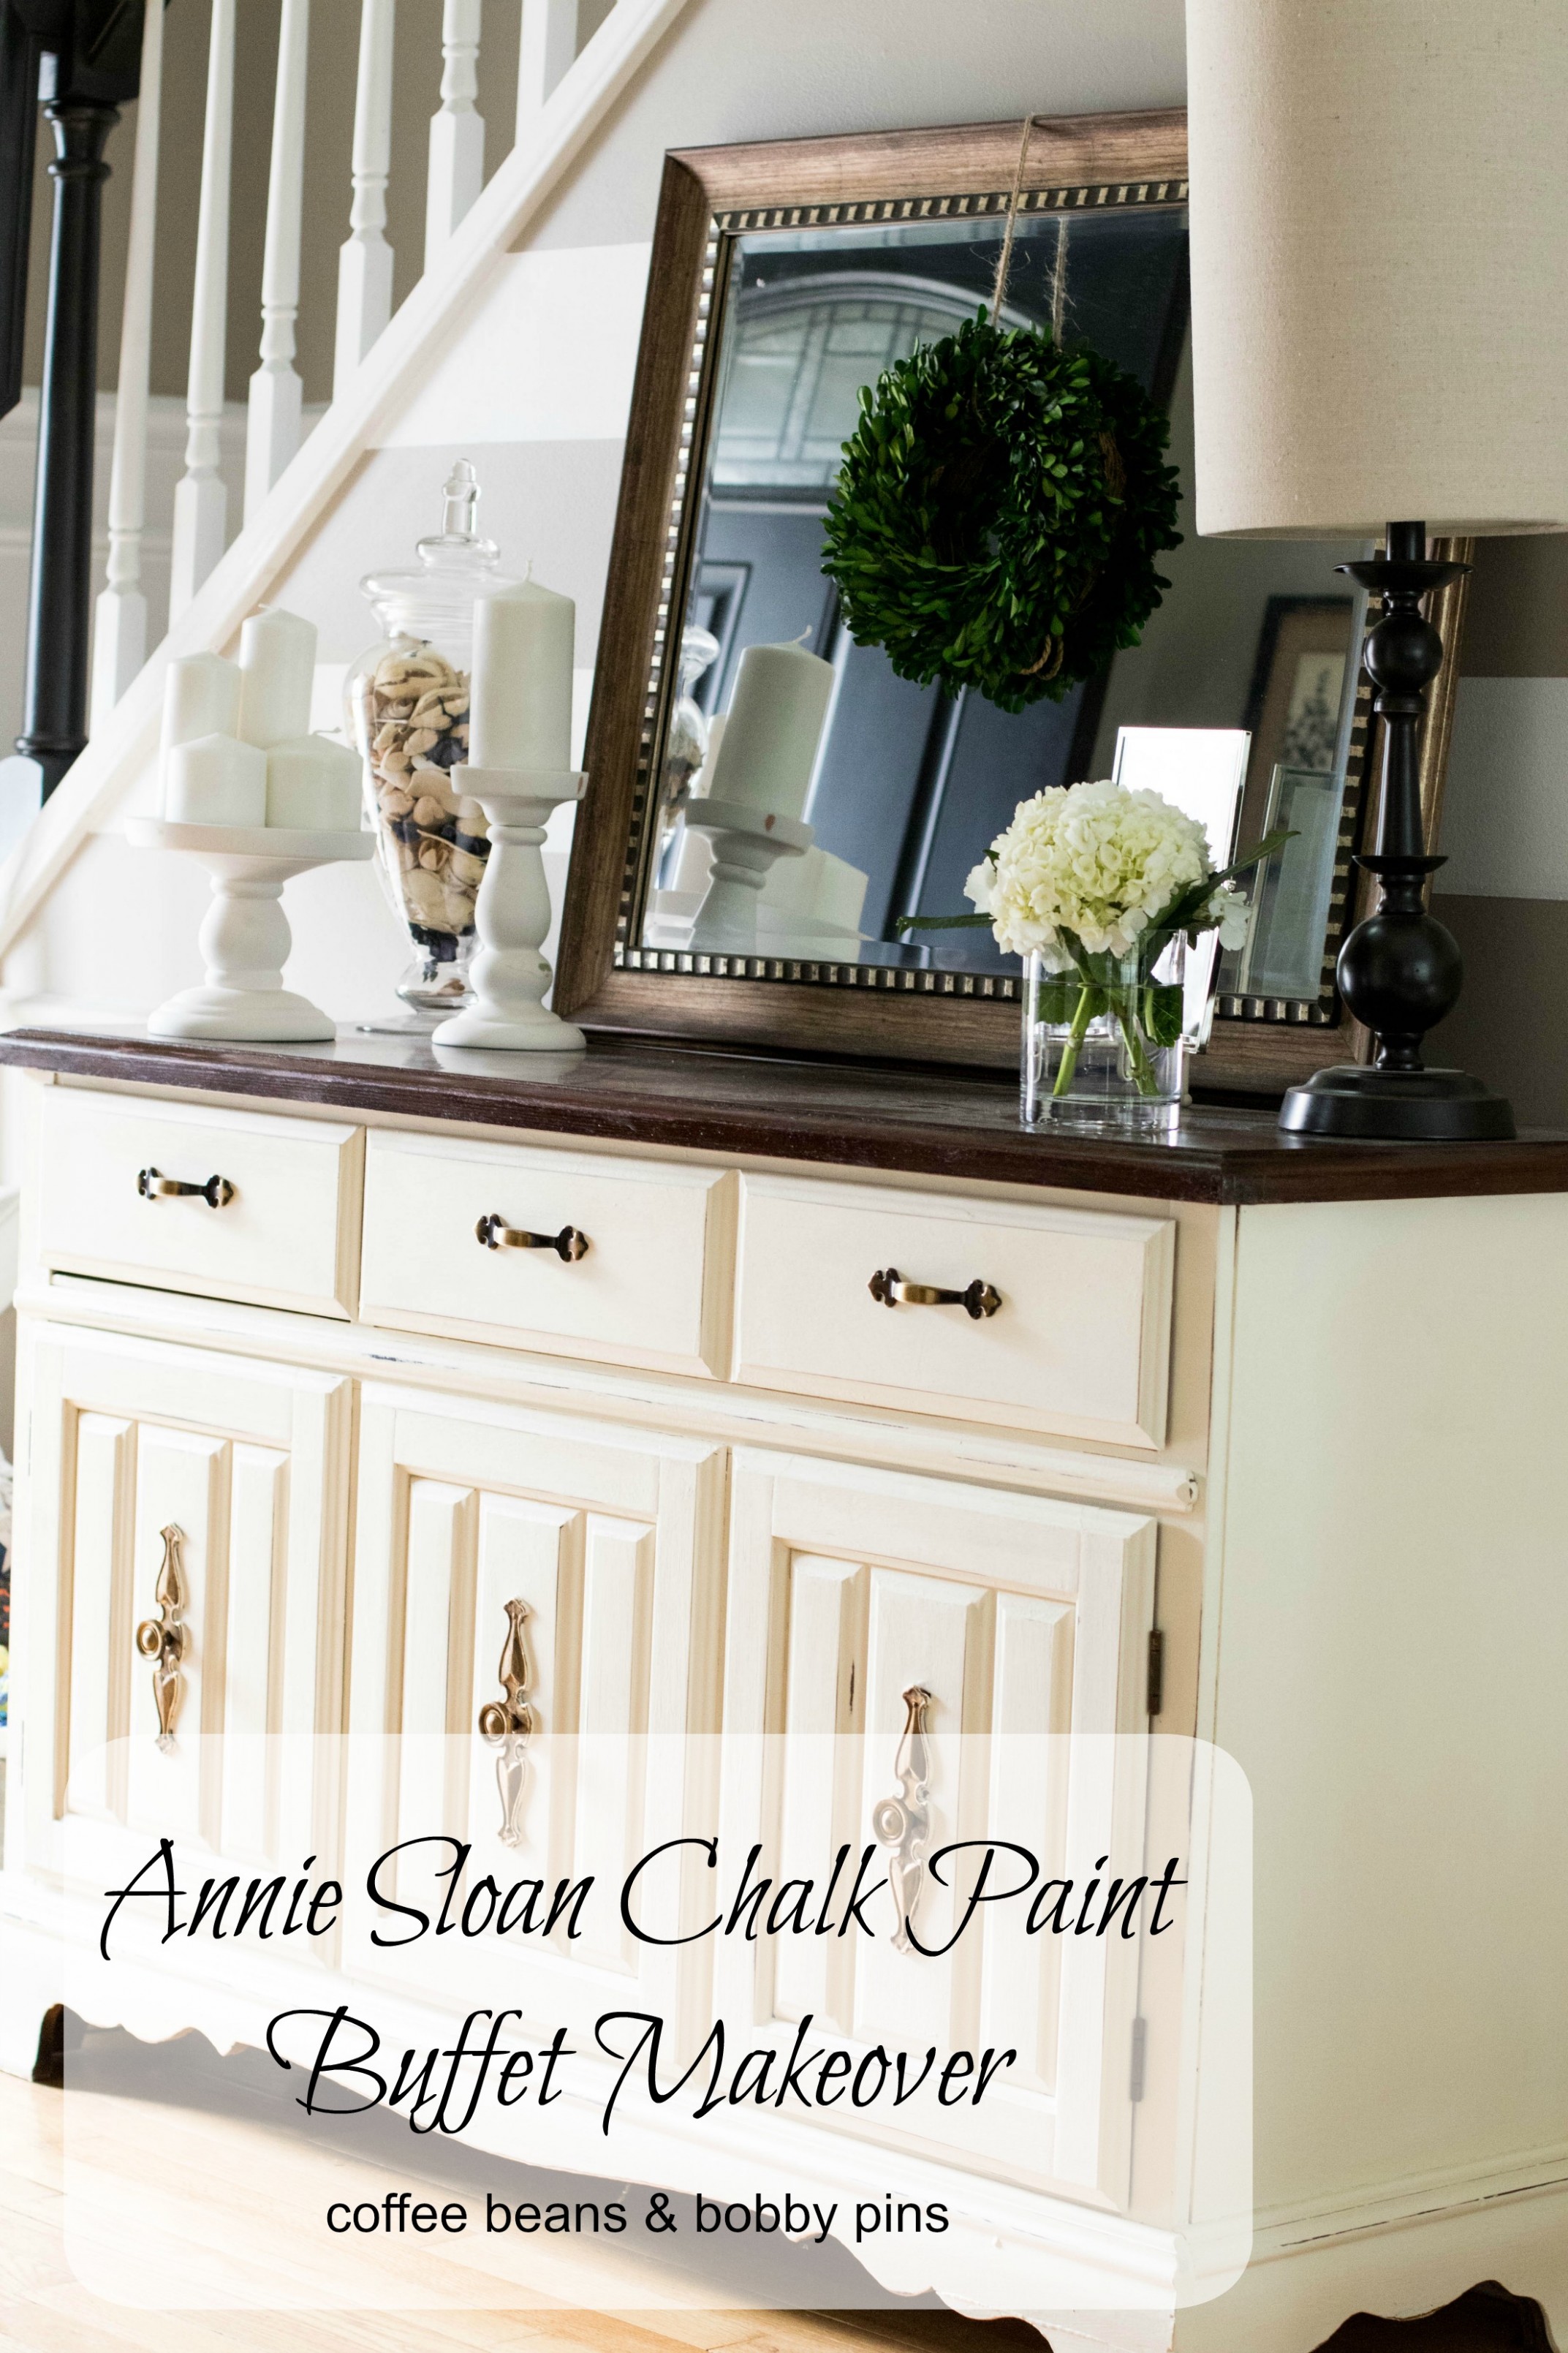 Annie Sloan Chalk Paint: Buffet Makeover | Coffee Beans And Bobby Pins Where Is Annie Sloan Chalk Paint Sold